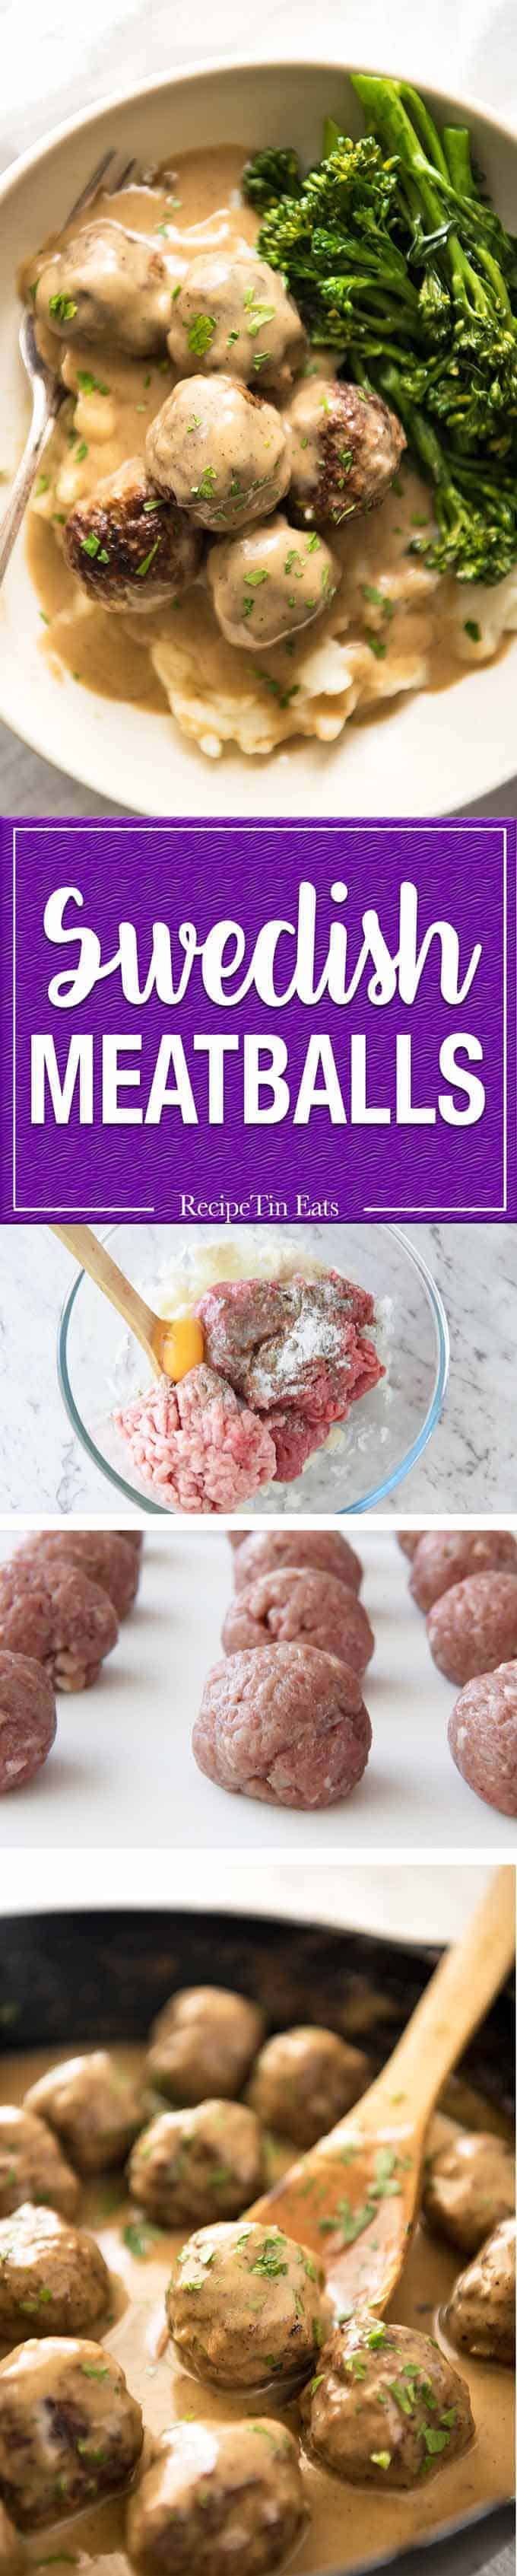 Swedish Meatballs - With a tip for extra soft and tasty meatballs, smothered in a gorgeous creamy sauce. No more Ikea meatballs! www.recipetineats.com